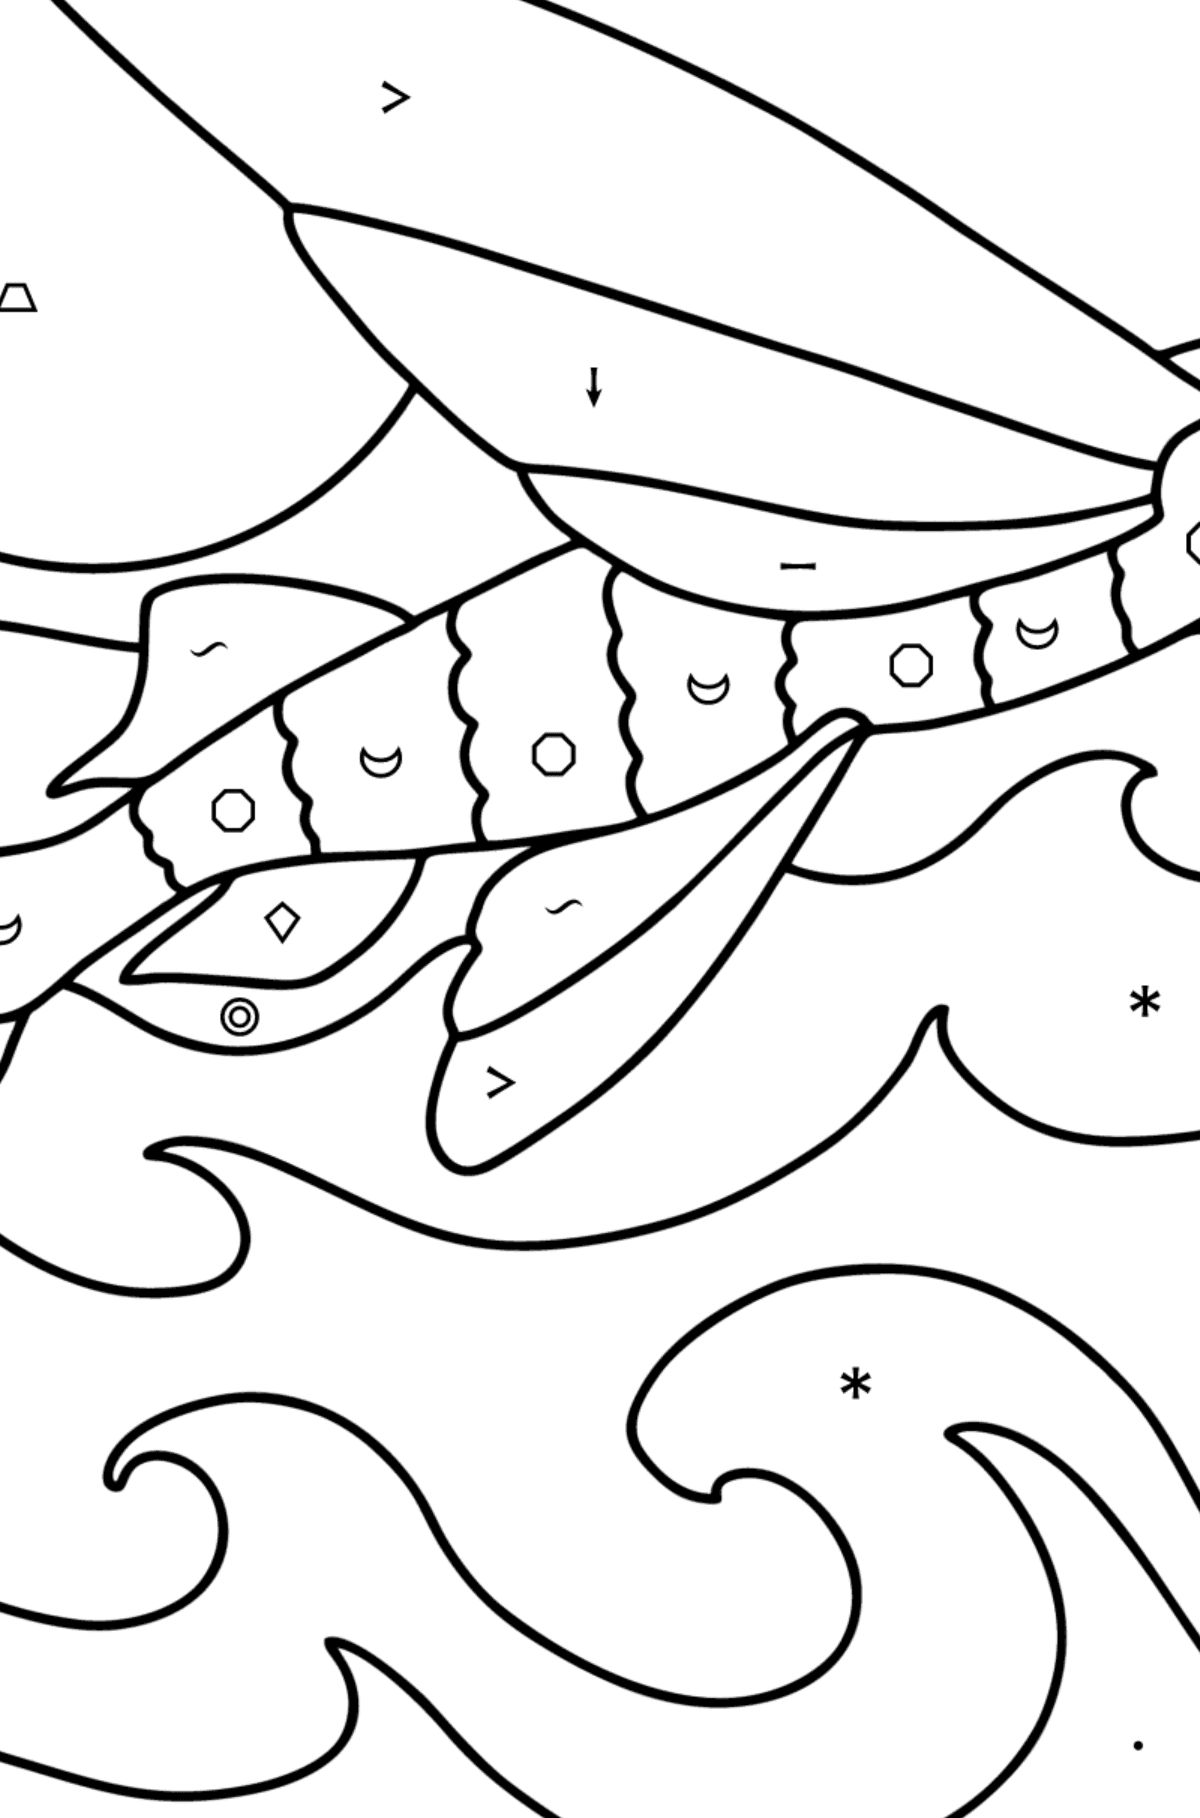 Flying fish coloring page - Coloring by Symbols and Geometric Shapes for Kids